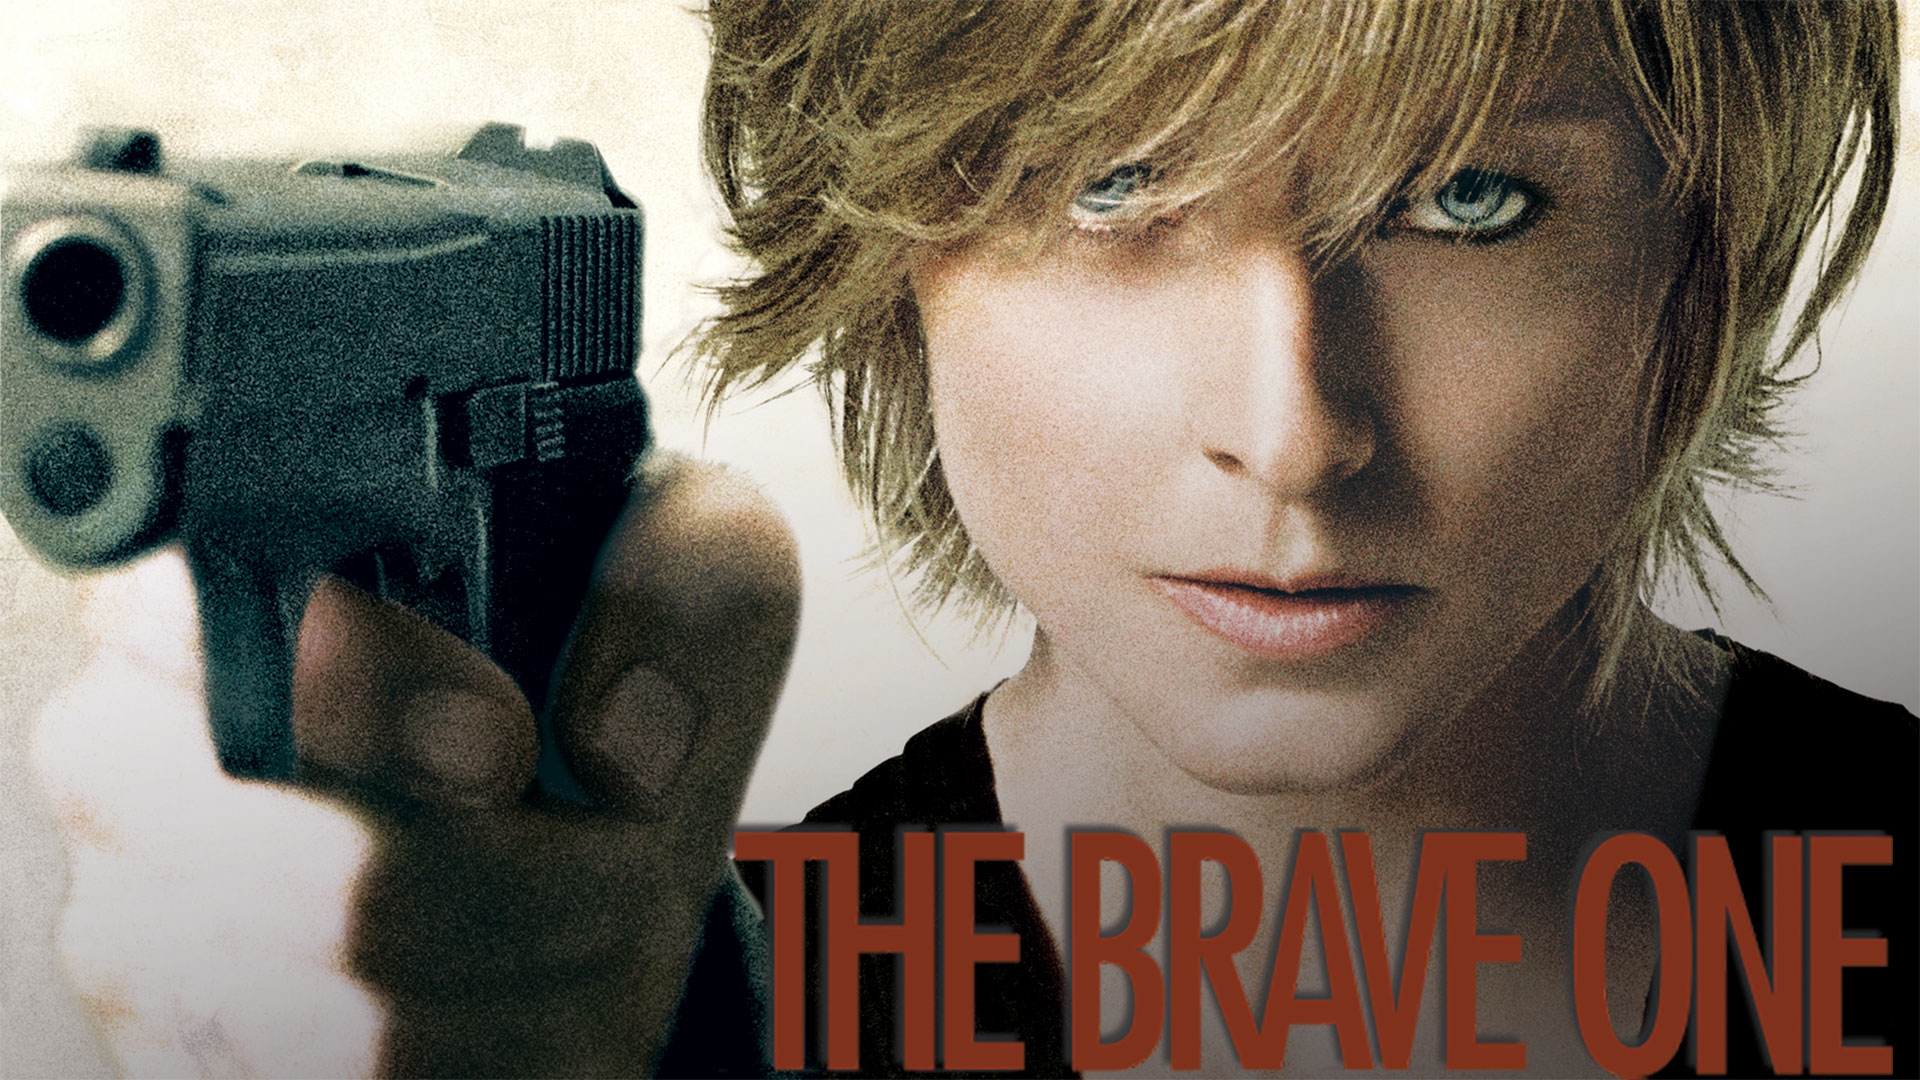 Stream The Brave One Online, Download and Watch HD Movies